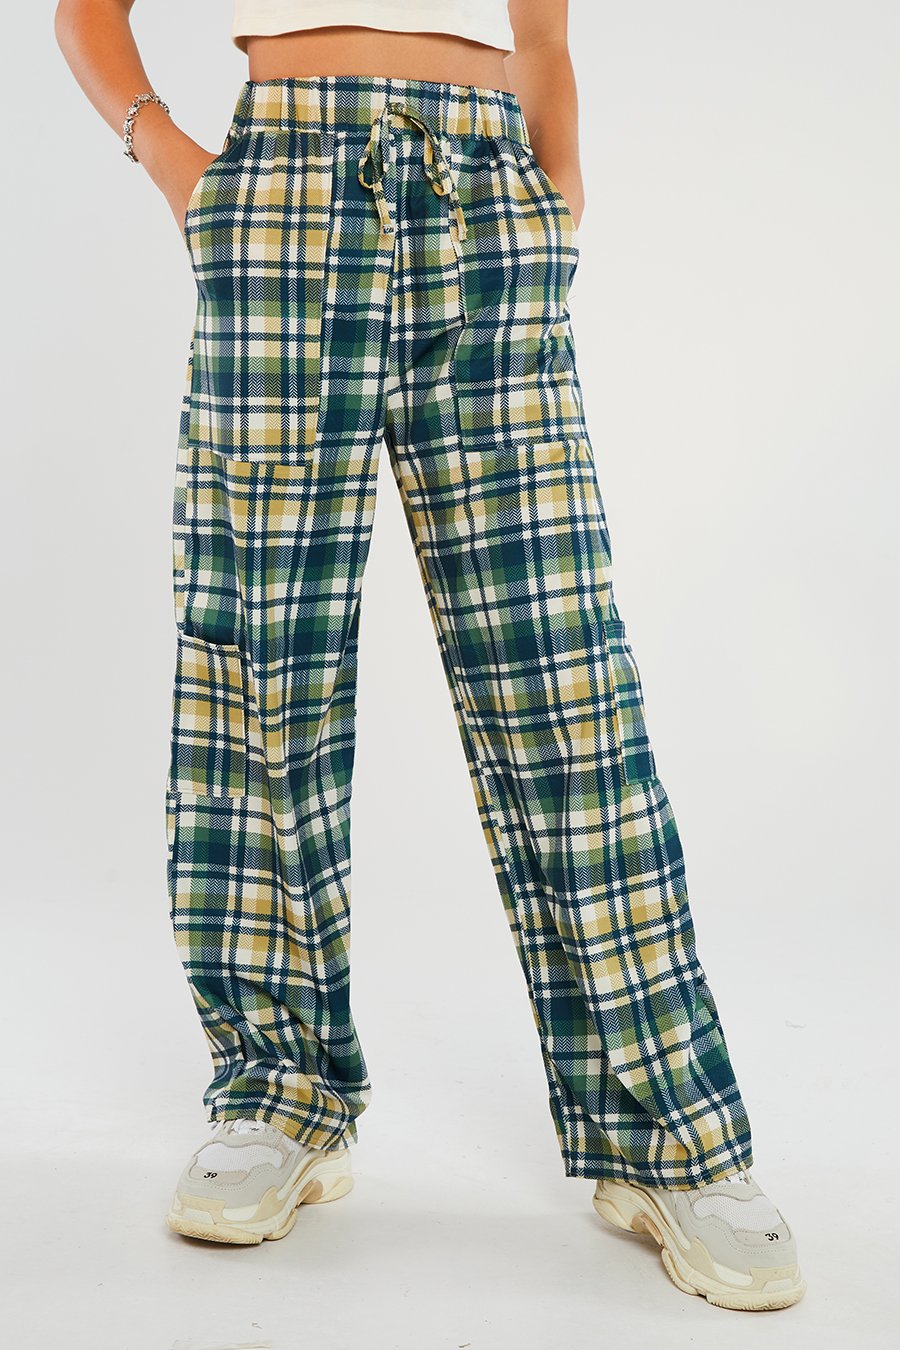 CHECKERED WL 90'S PANT - EXCLUSIVE Pants from NGO - Just €27! SHOP NOW AT IAMINHATELOVE BOTH IN STORE FOR CYPRUS AND ONLINE WORLDWIDE @ IAMINHATELOVE.COM